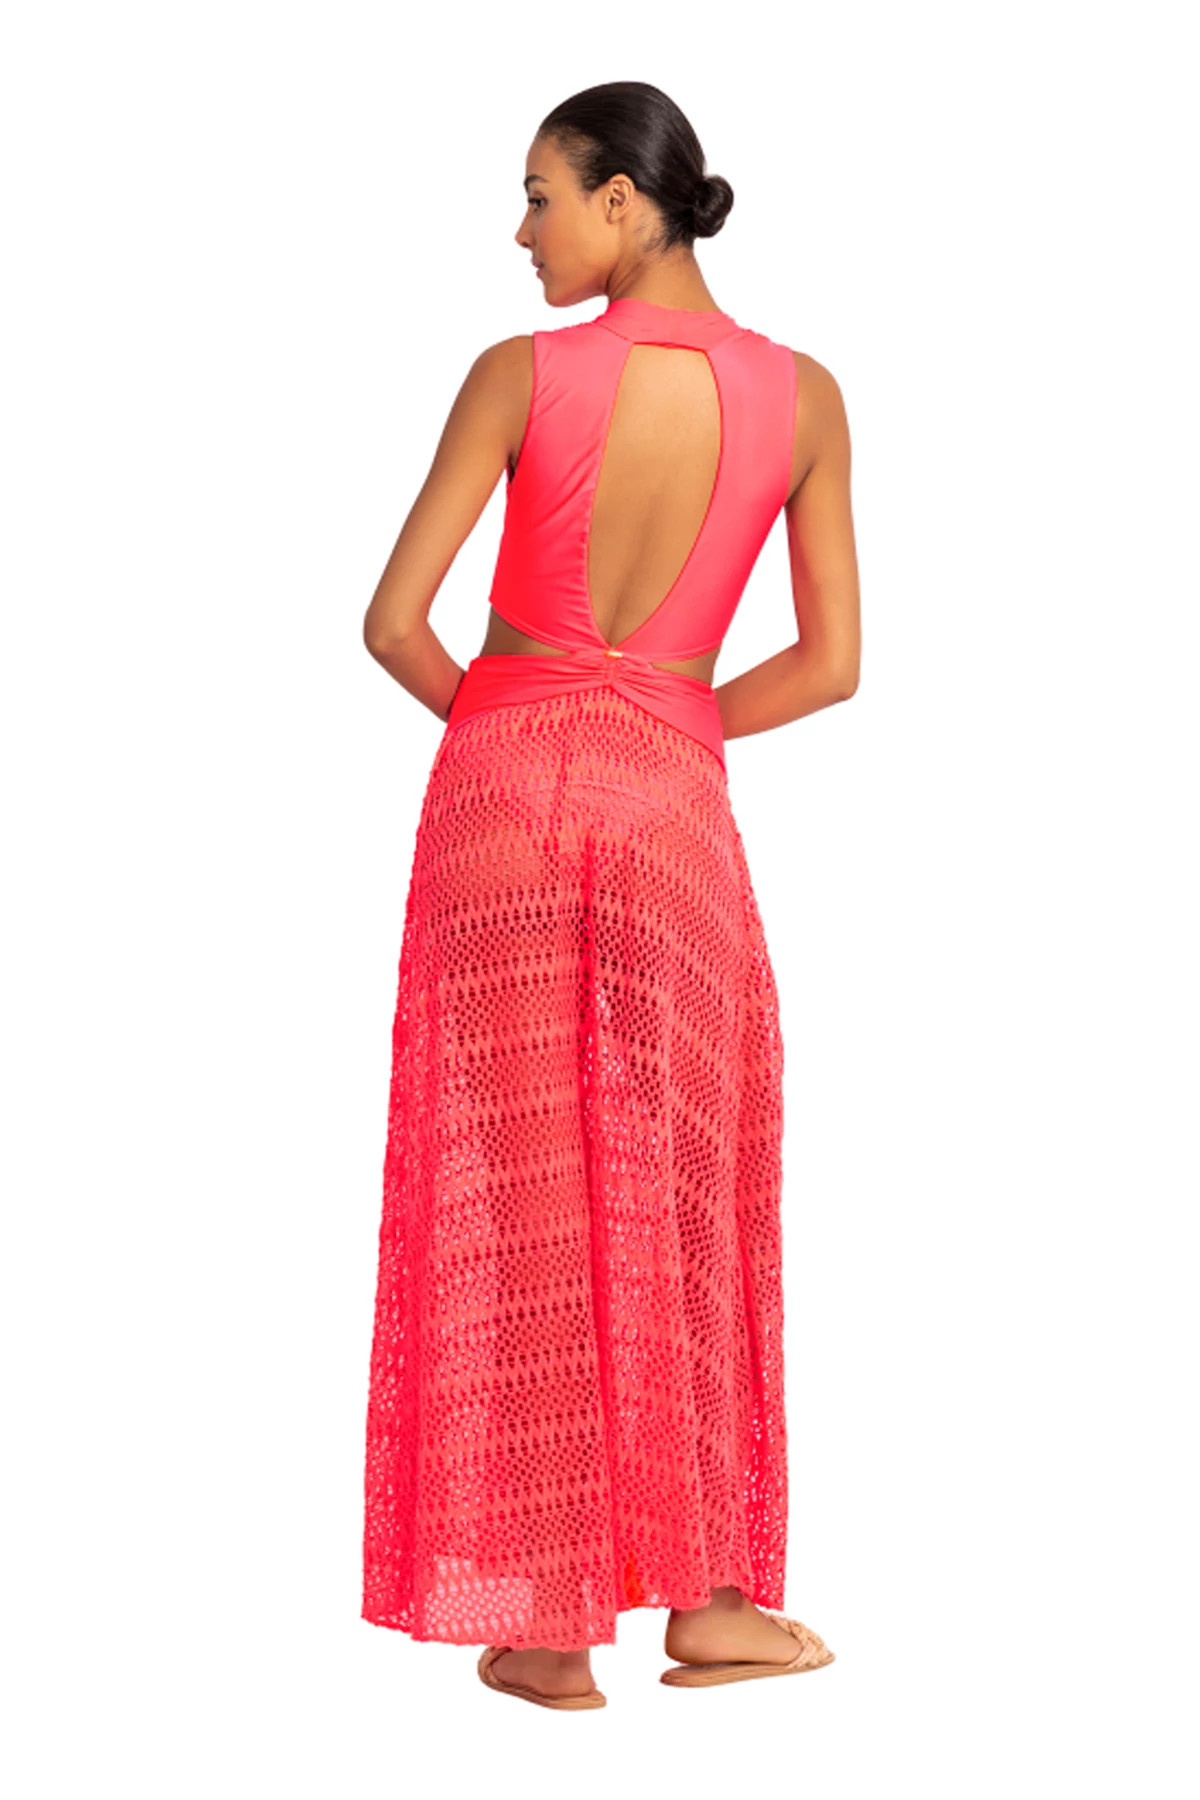 NEON CORAL Plunge Crochet Beach Dress image number 2